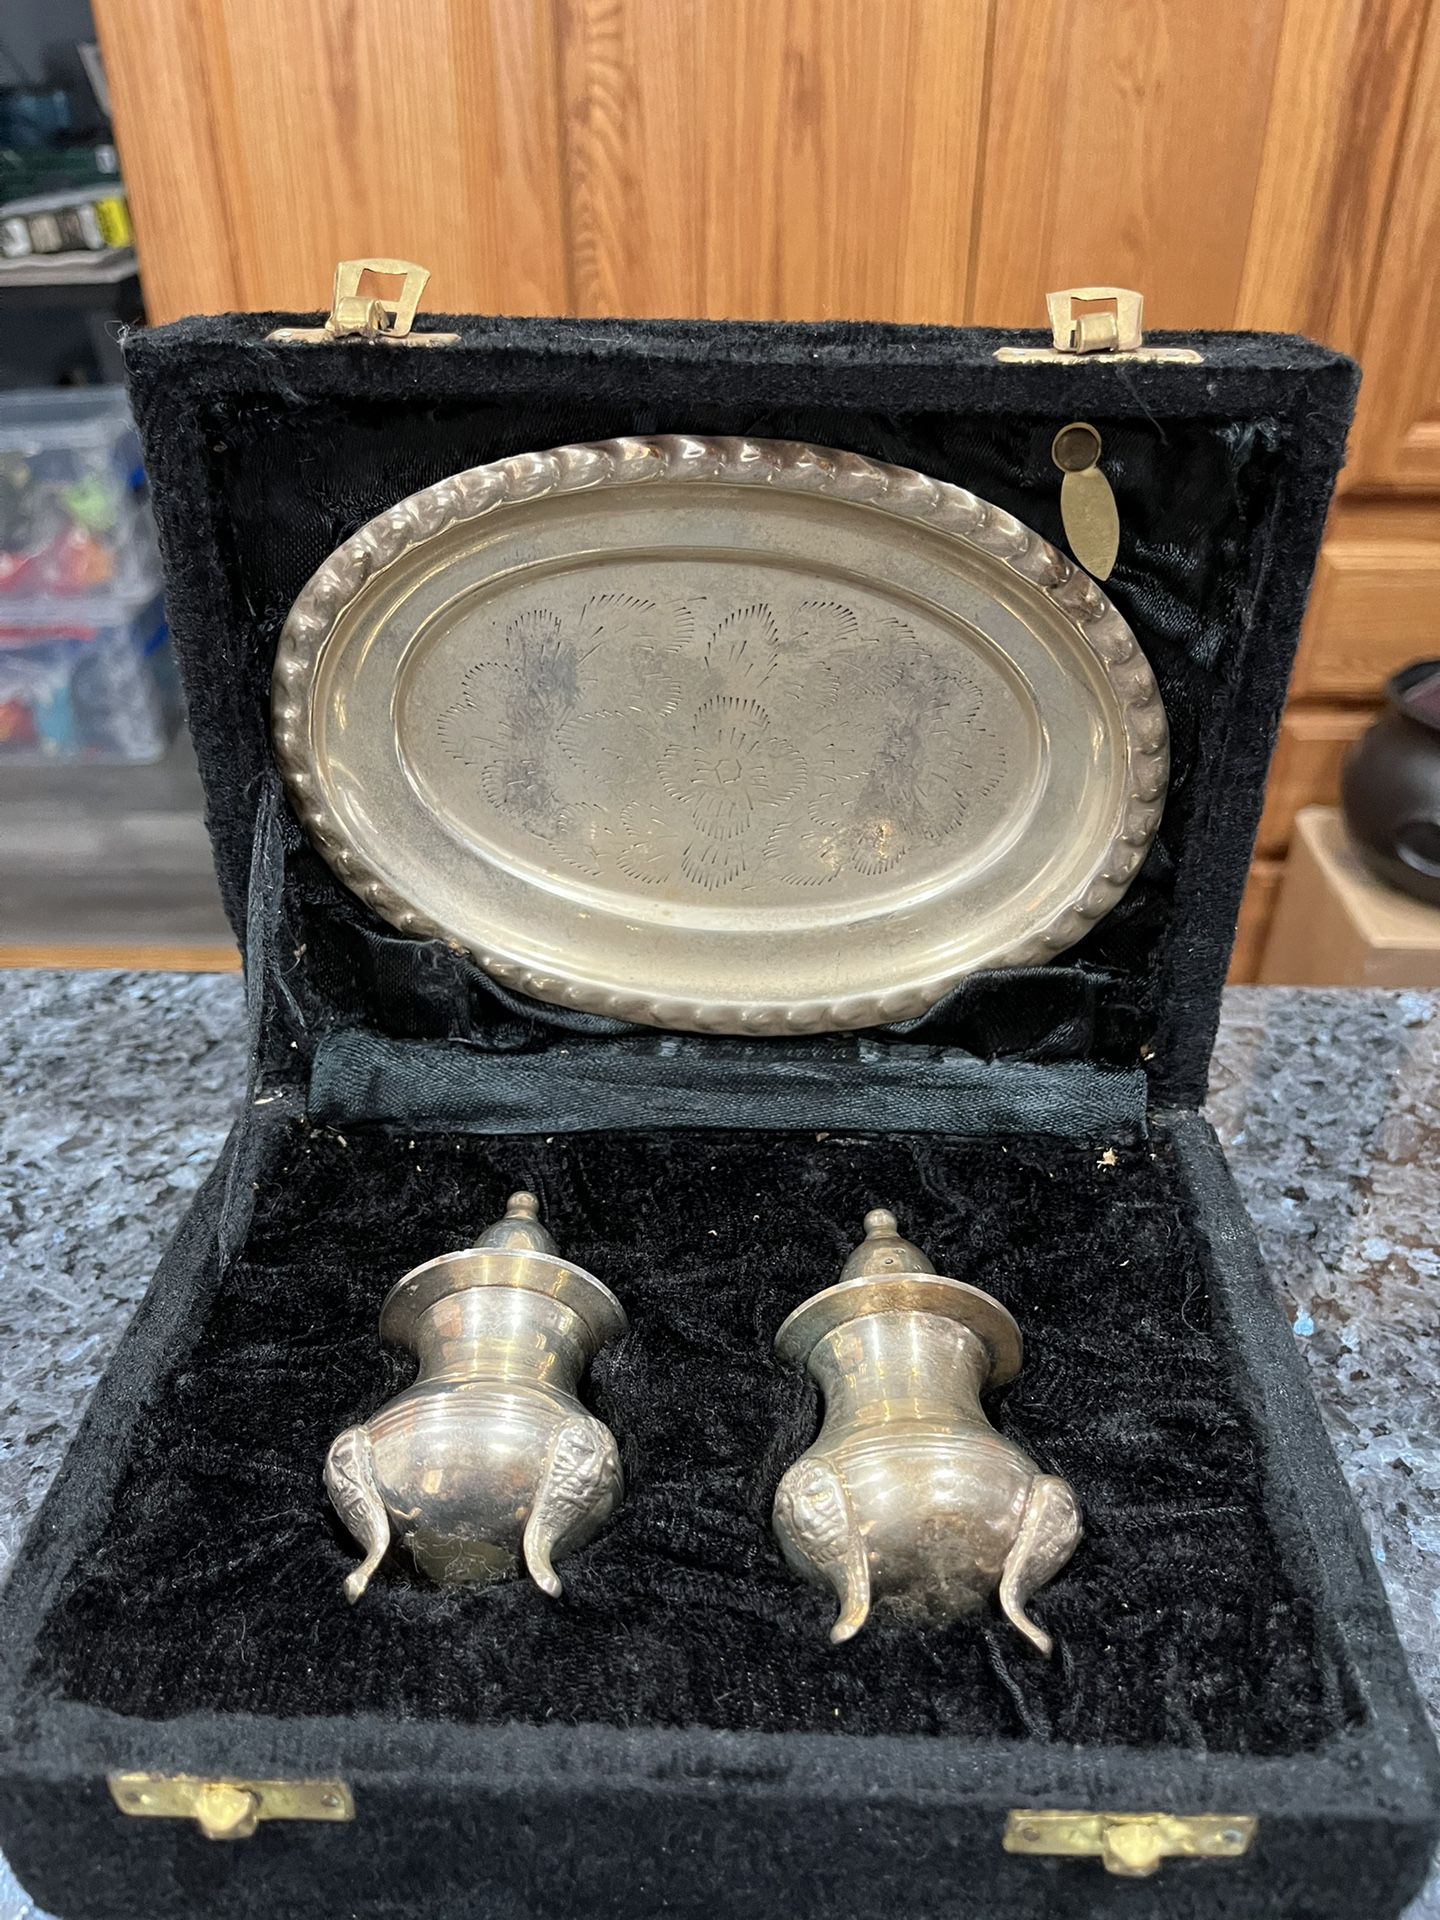 Vintage International Silver Co. Pair Of Salt And Pepper Shakers In Case With Small Dish.  Preowned .  Silver plated 